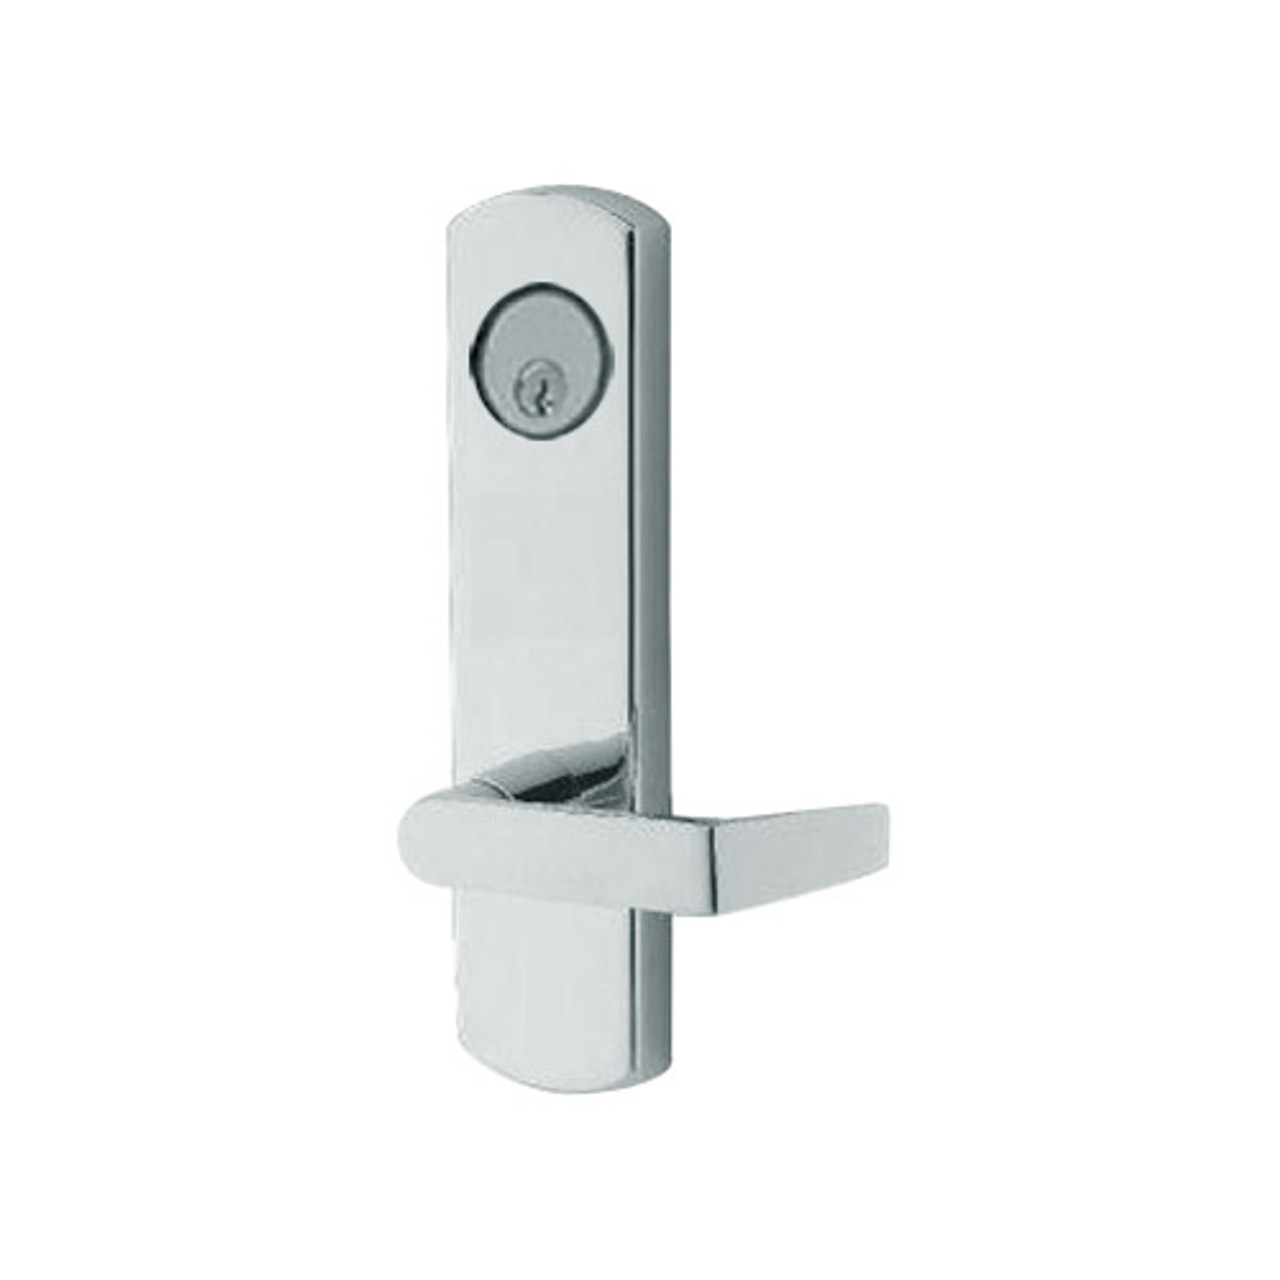 3080E-03-0-93-30 US32 Adams Rite Electrified Entry Trim with Square Lever in Bright Stainless Finish